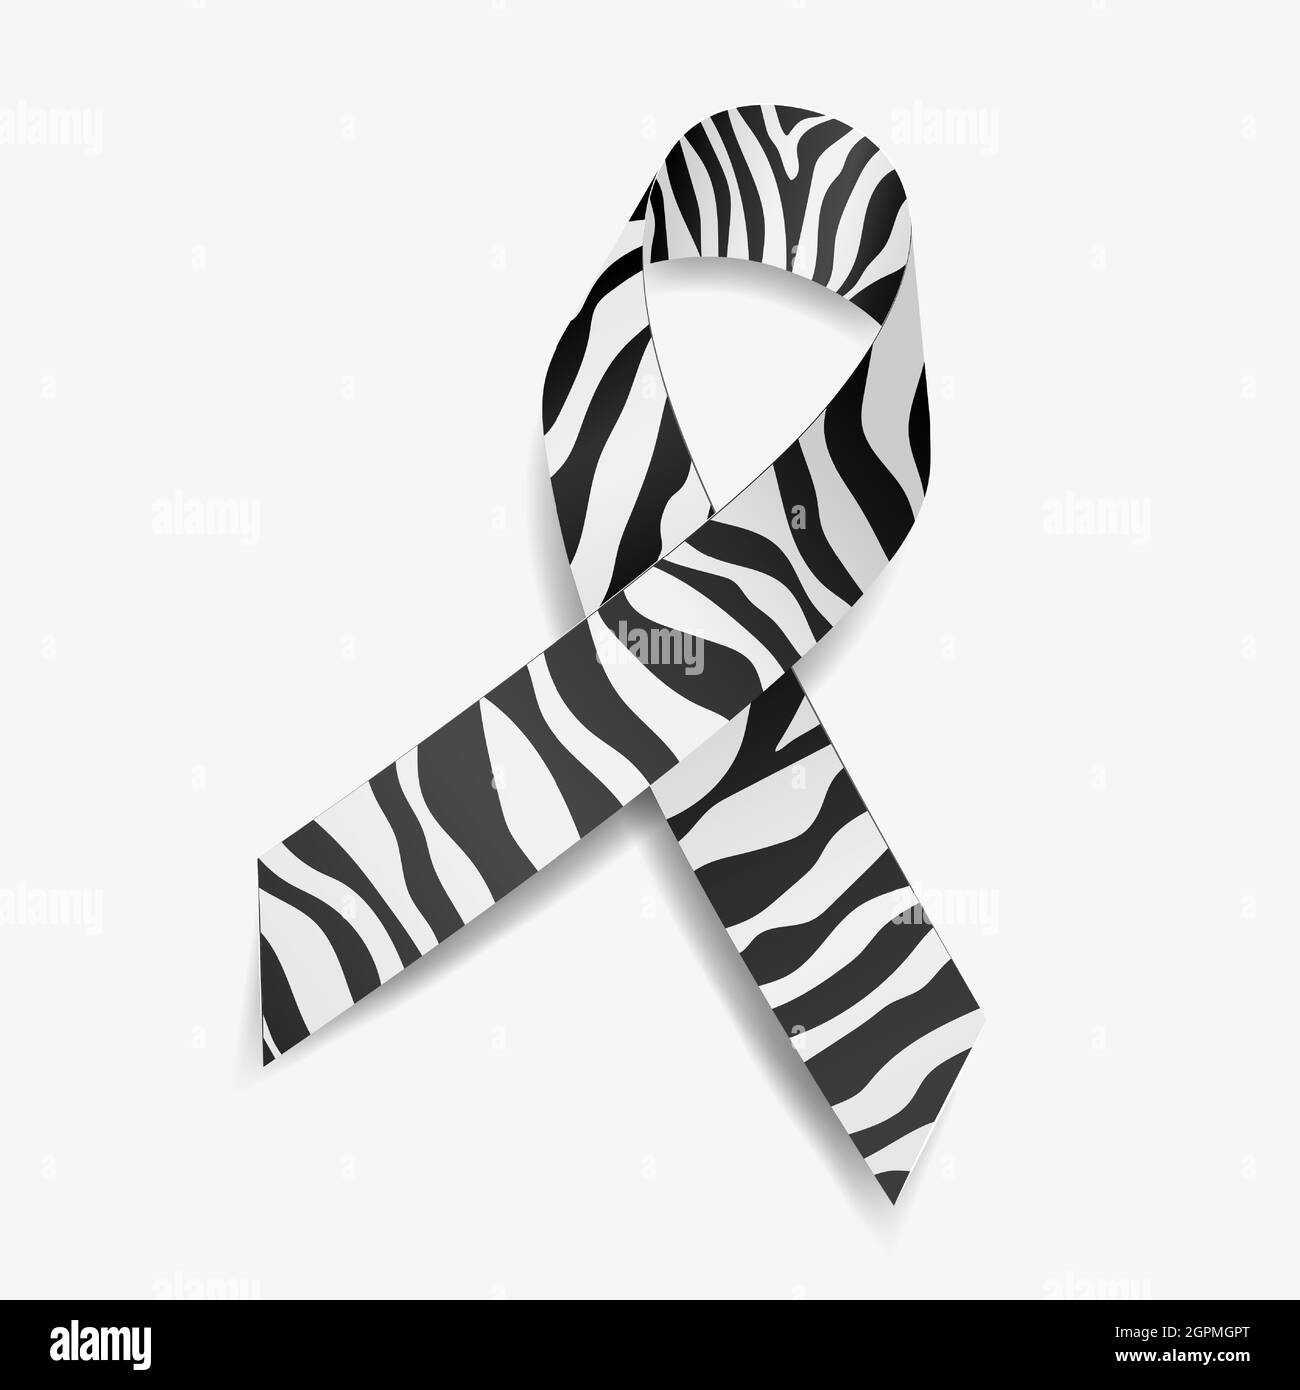 Zebra ribbon awareness Carcinoid Cancer, Ehlers-Danlos Syndrome, Rare Diseases and Disorders. Isolated on white background. Vector illustration. Stock Vector